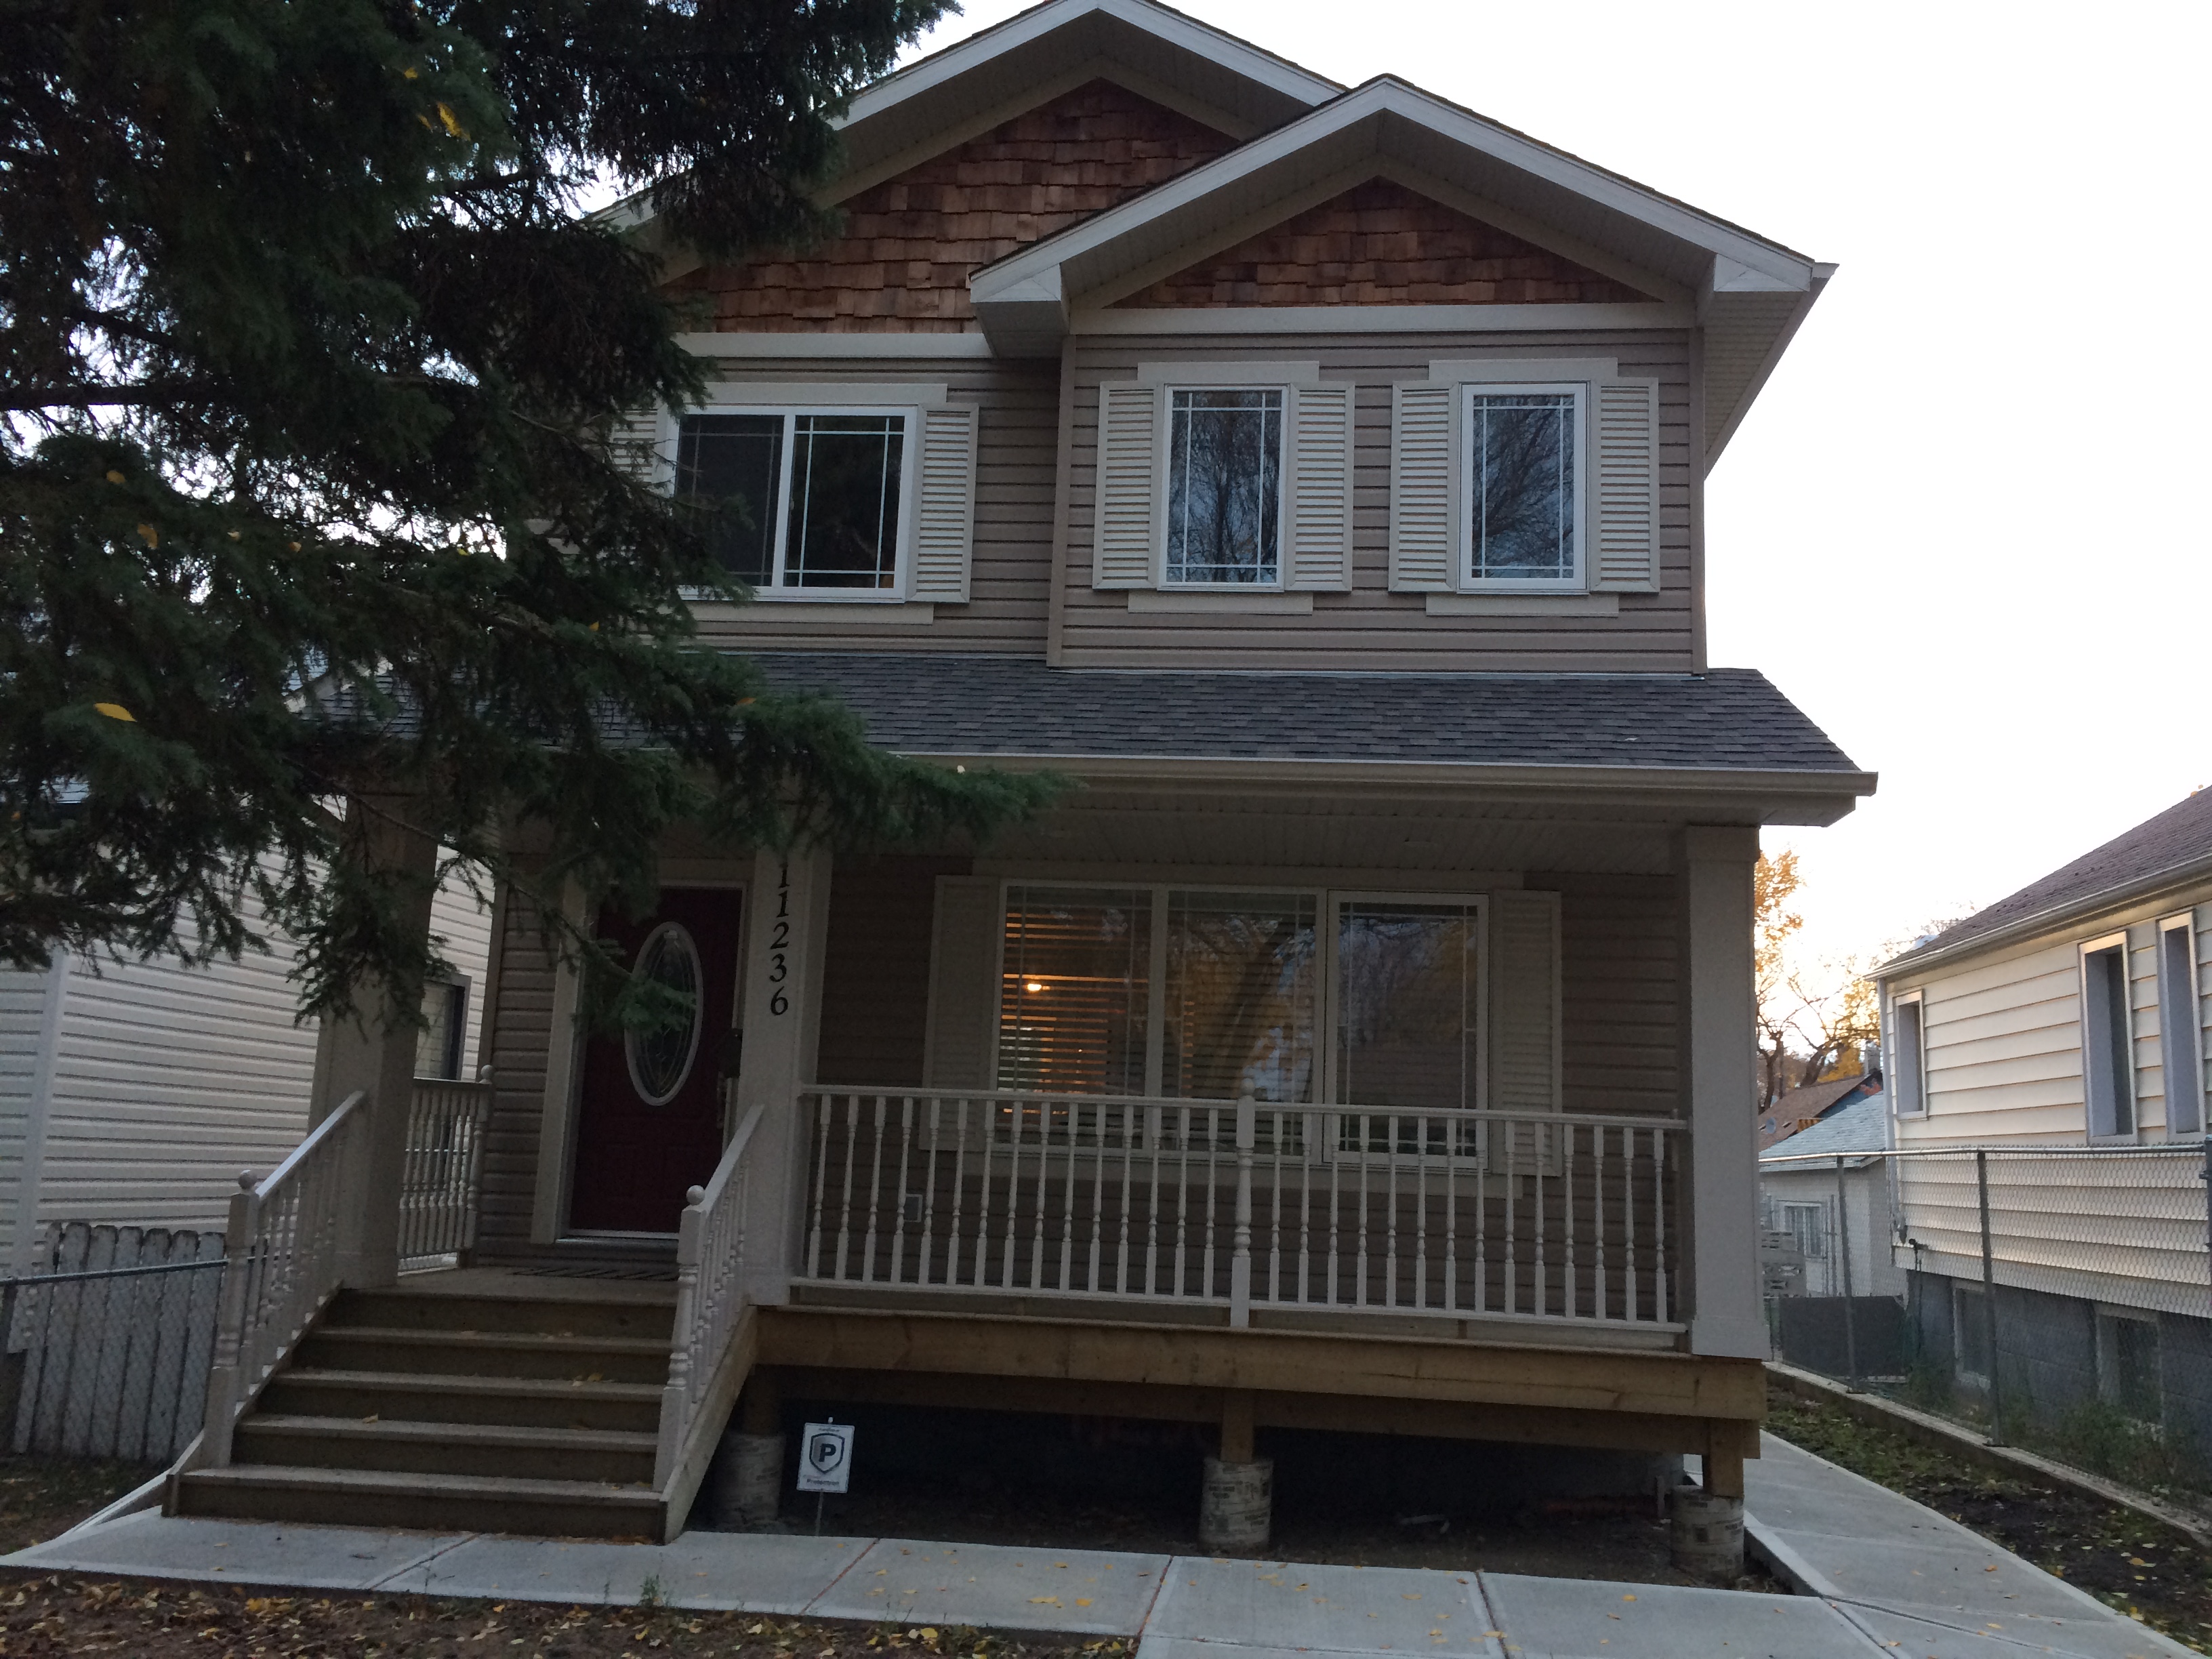 3 Bedroom Full house, Newly Built. PARKDALE, $1799